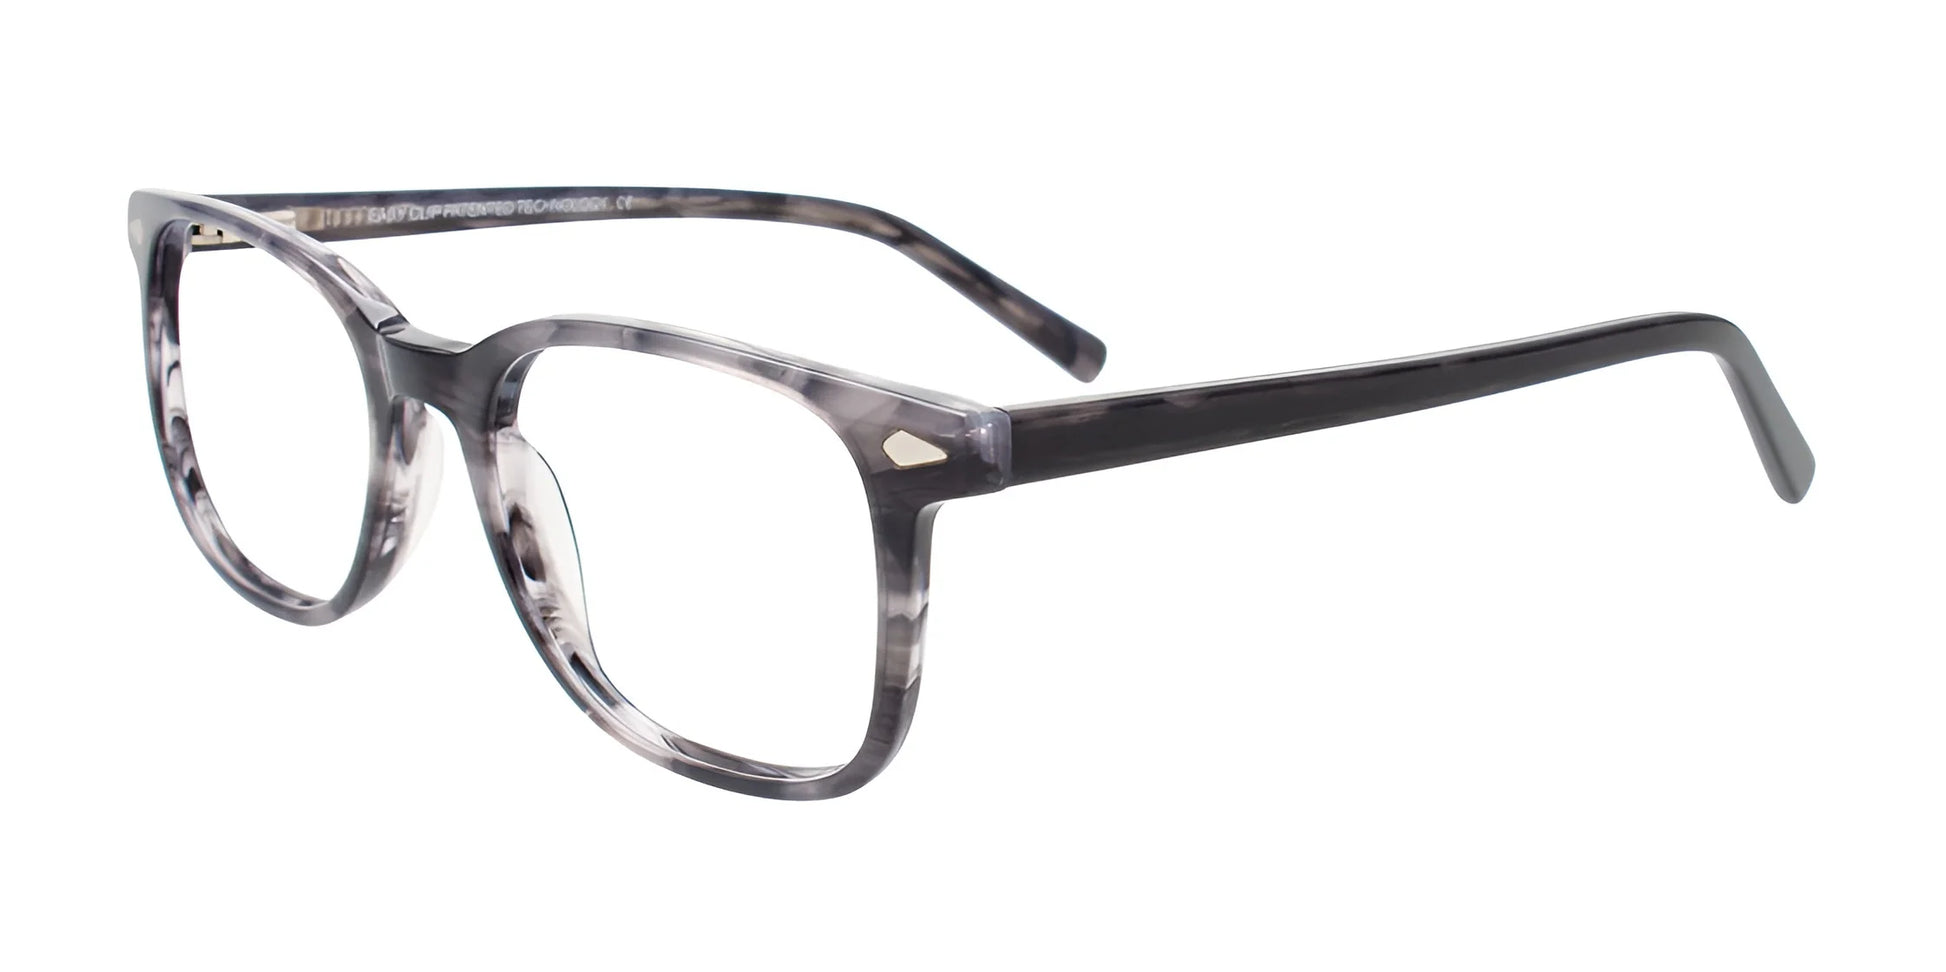 EasyClip EC653 Eyeglasses with Clip-on Sunglasses Marbled Grey